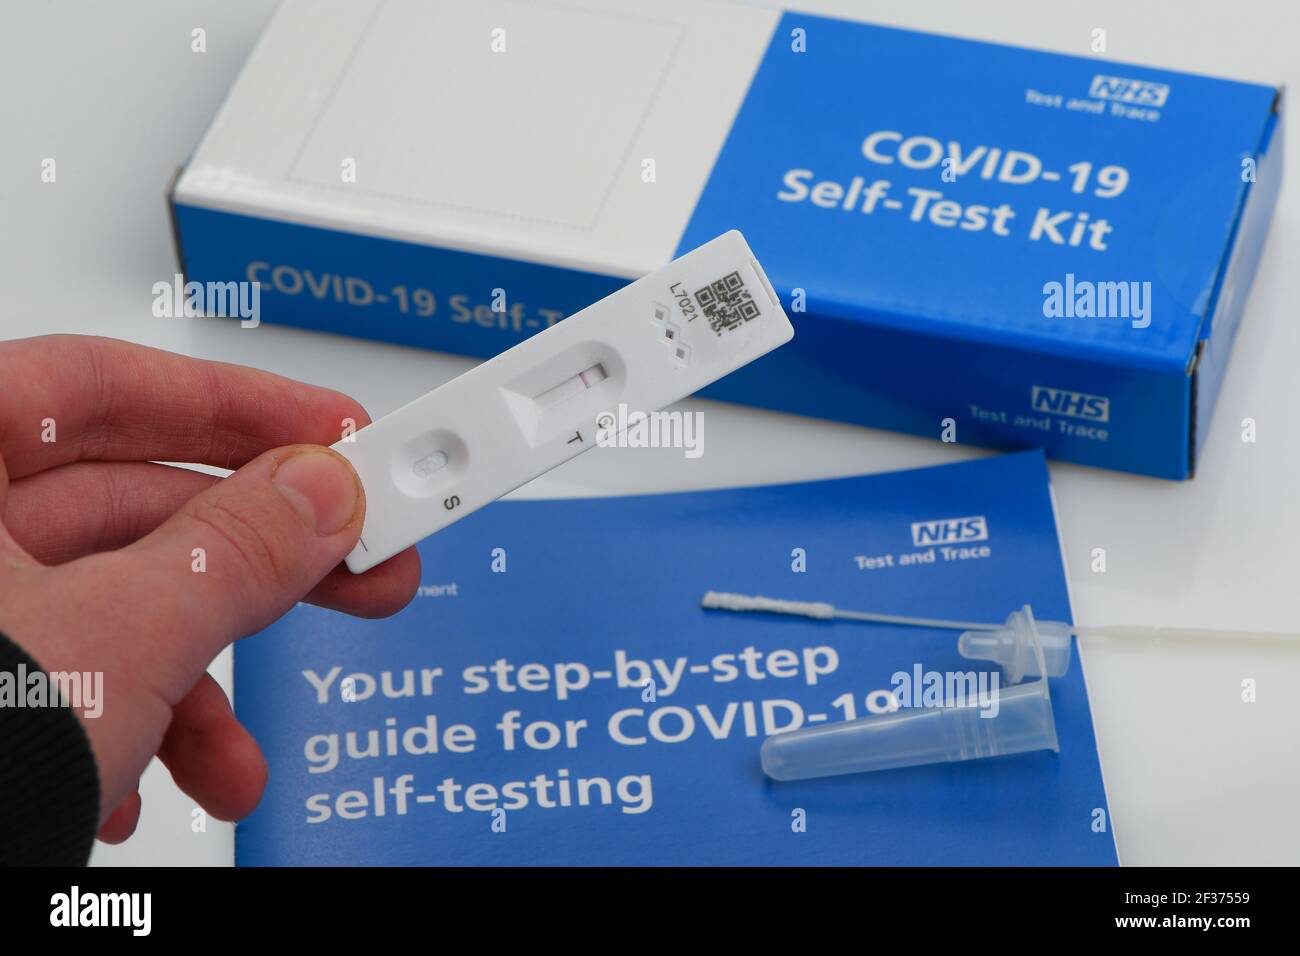 Covid-19 self-testing NHS test and trace home kit showing test results, this kit is given to school and college students for twice weekly testing. Stock Photo